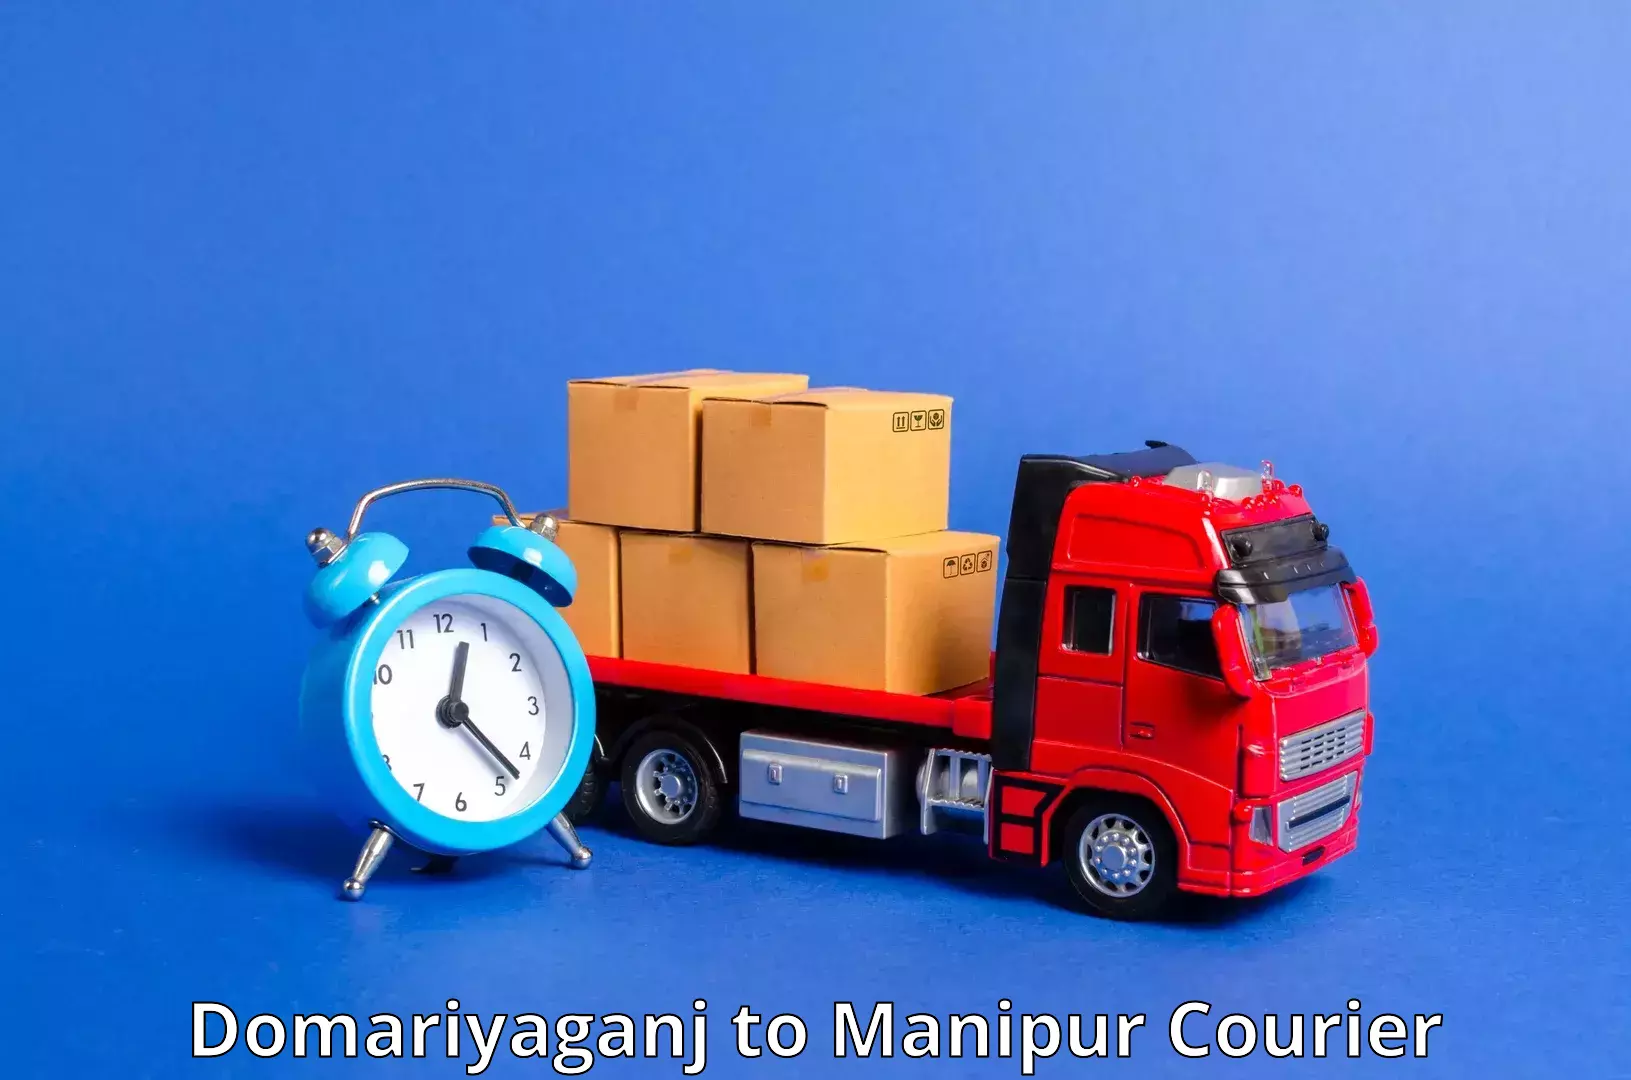 State-of-the-art courier technology Domariyaganj to Kakching